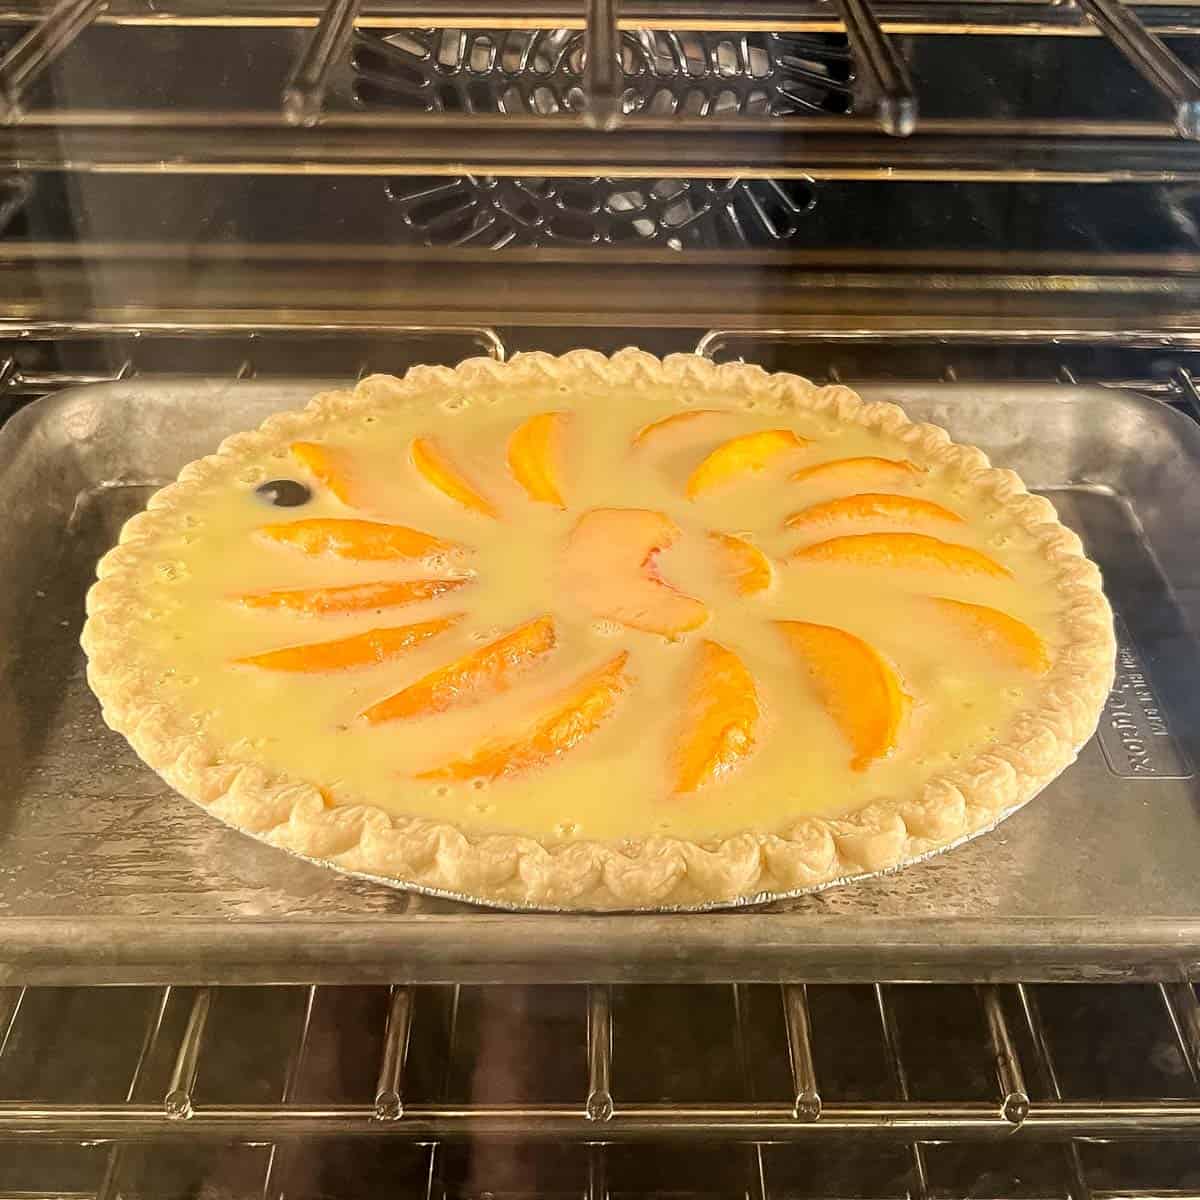 pie in oven baking, showing peaches floating in custard filing